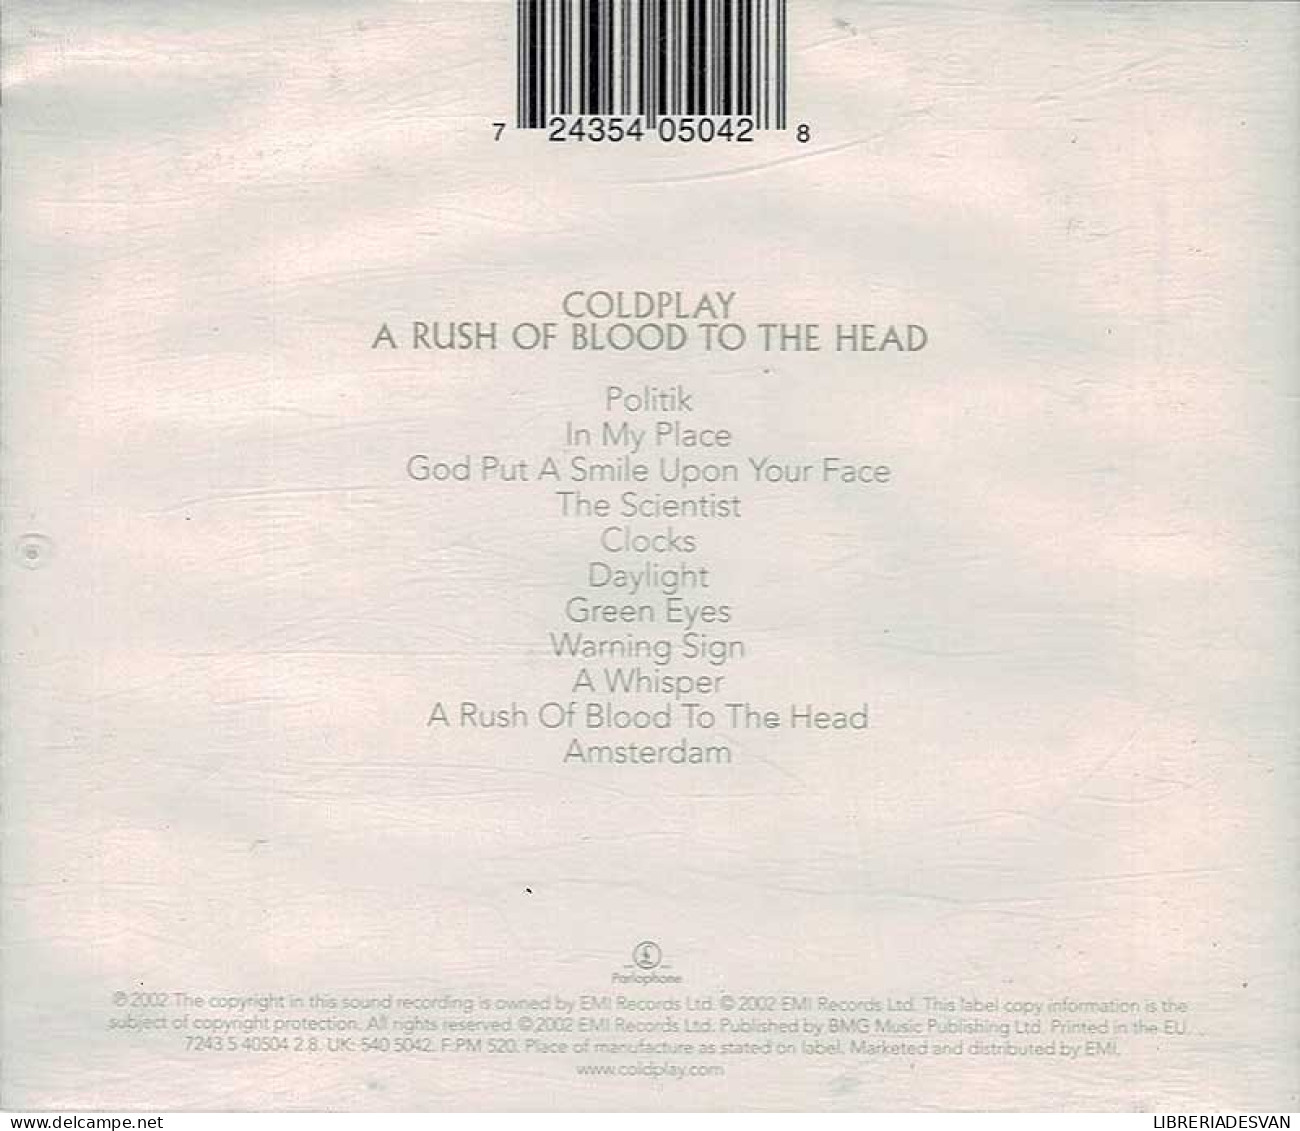 Coldplay - A Rush Of Blood To The Head. CD - Disco & Pop